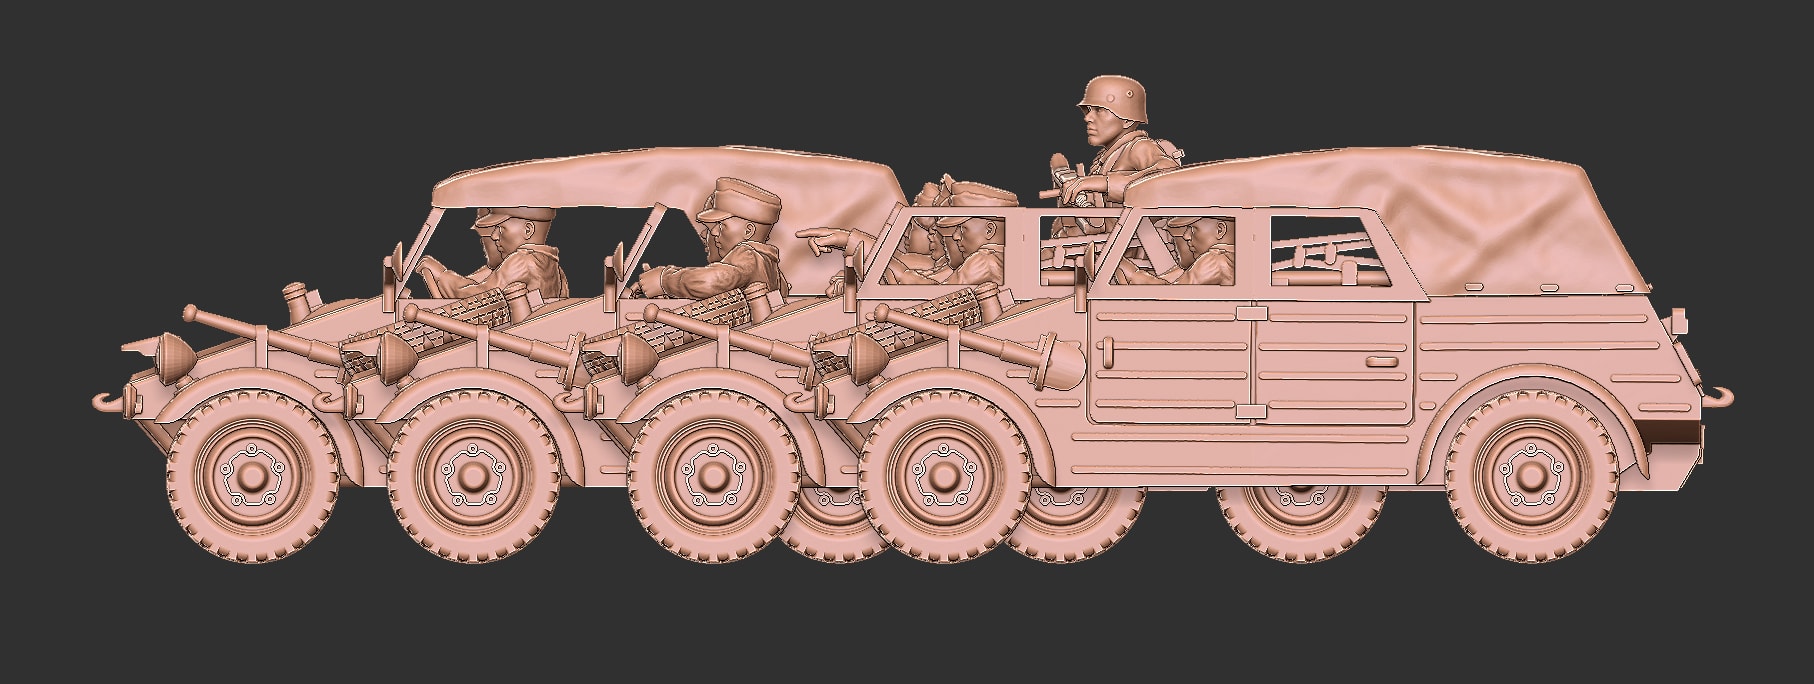 Kubelwagen Covered scaled at 1:50th suitable for wargames,bolt action 